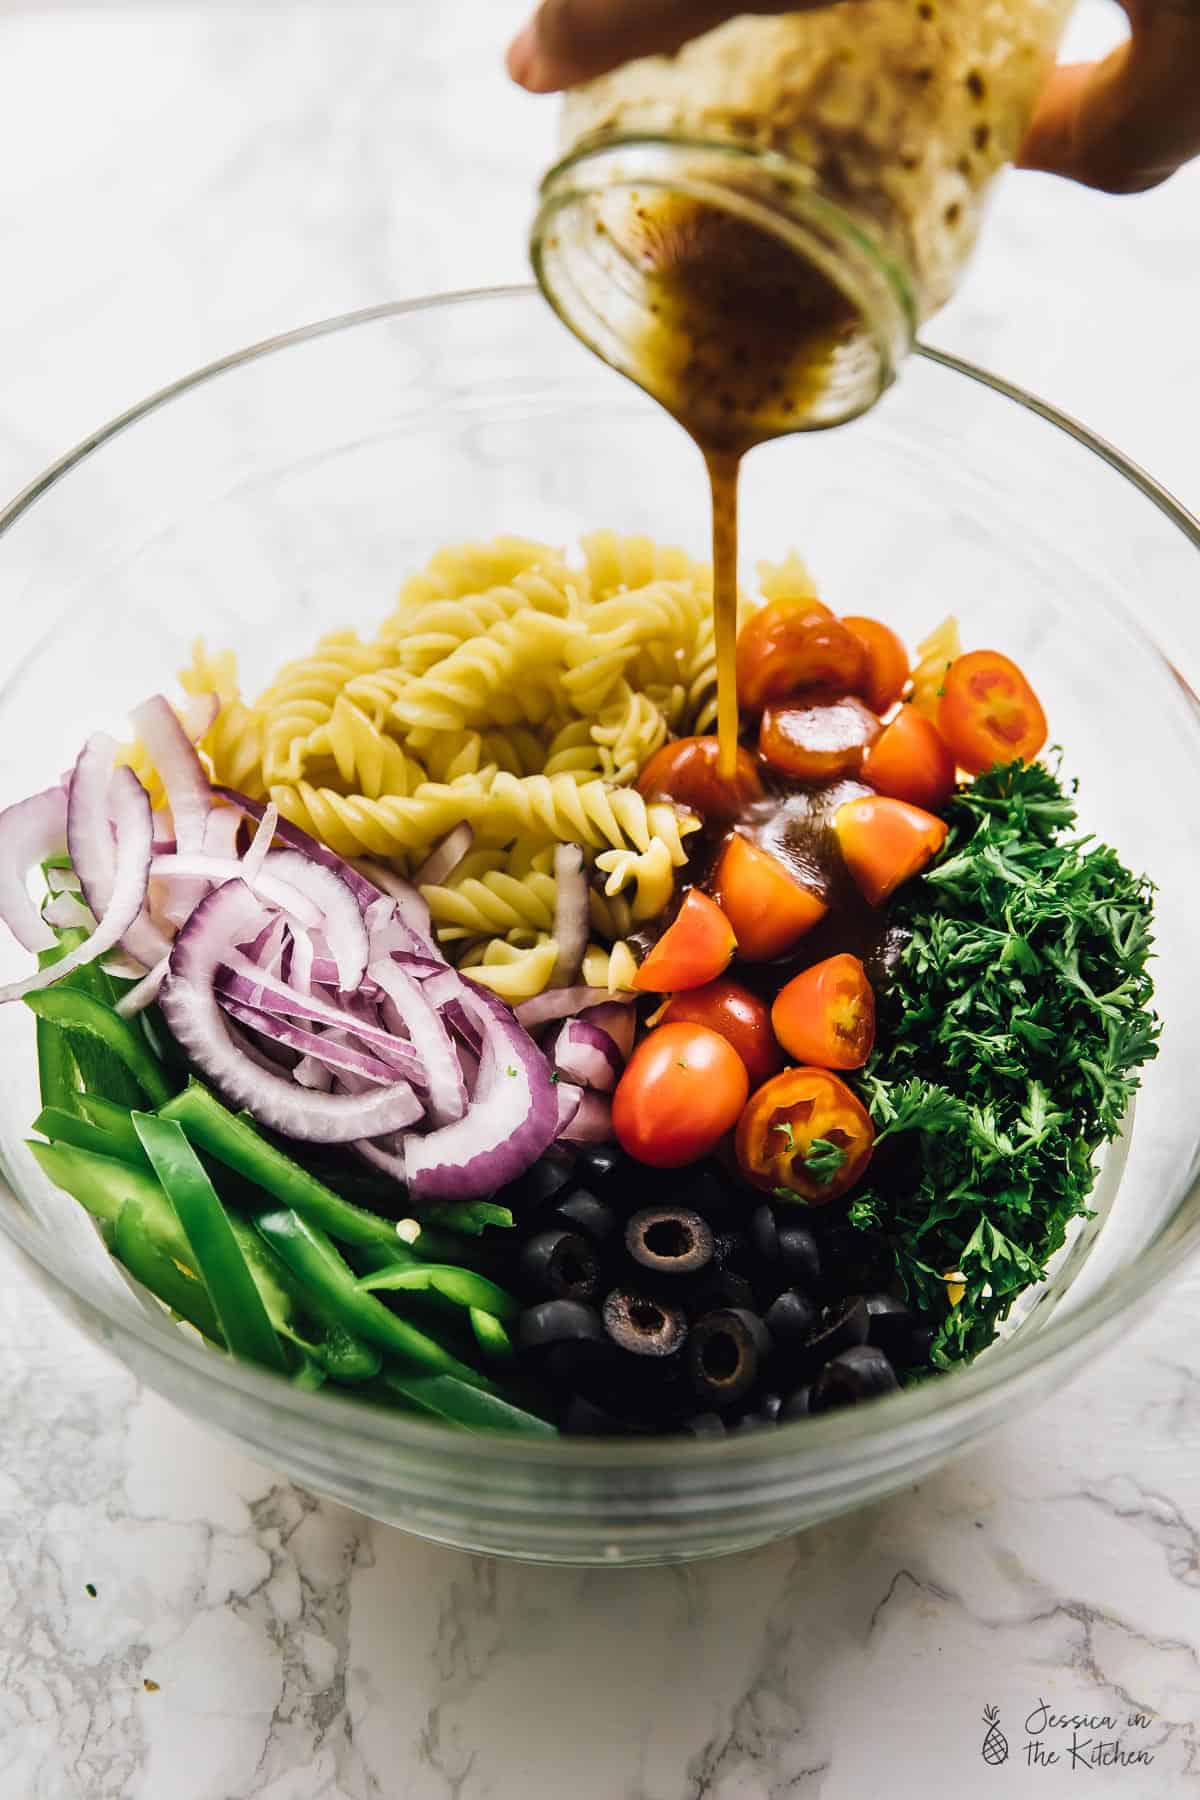 Pouring dressing on vegan pasta salad in a glass bowl. 